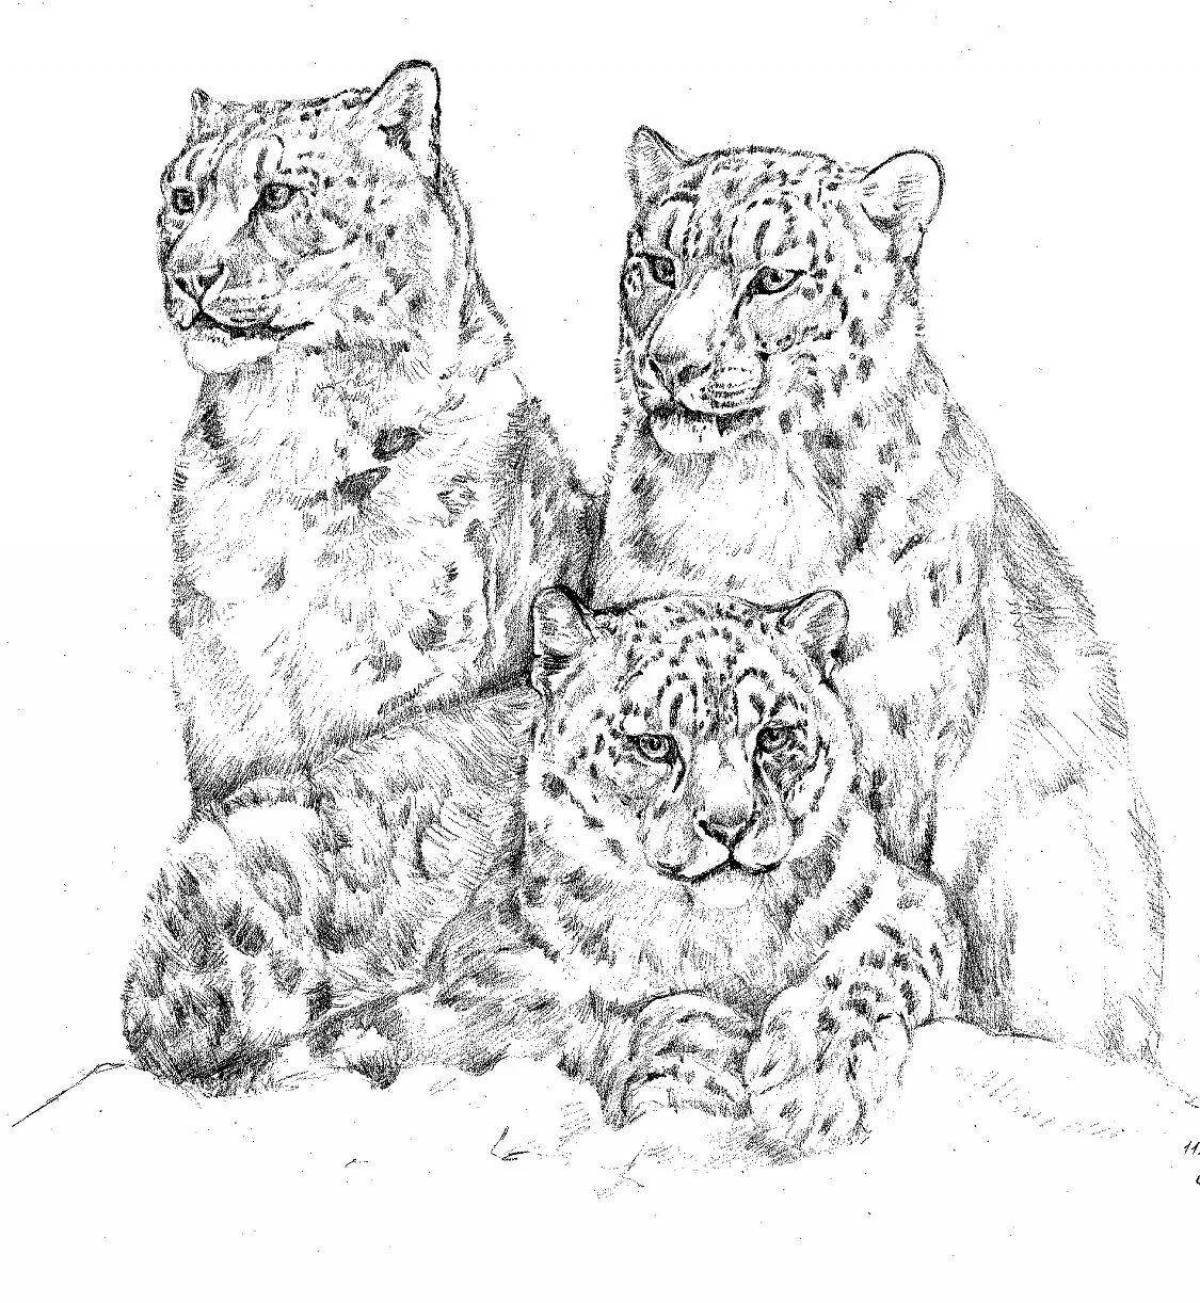 Dynamic coloring of the snow leopard